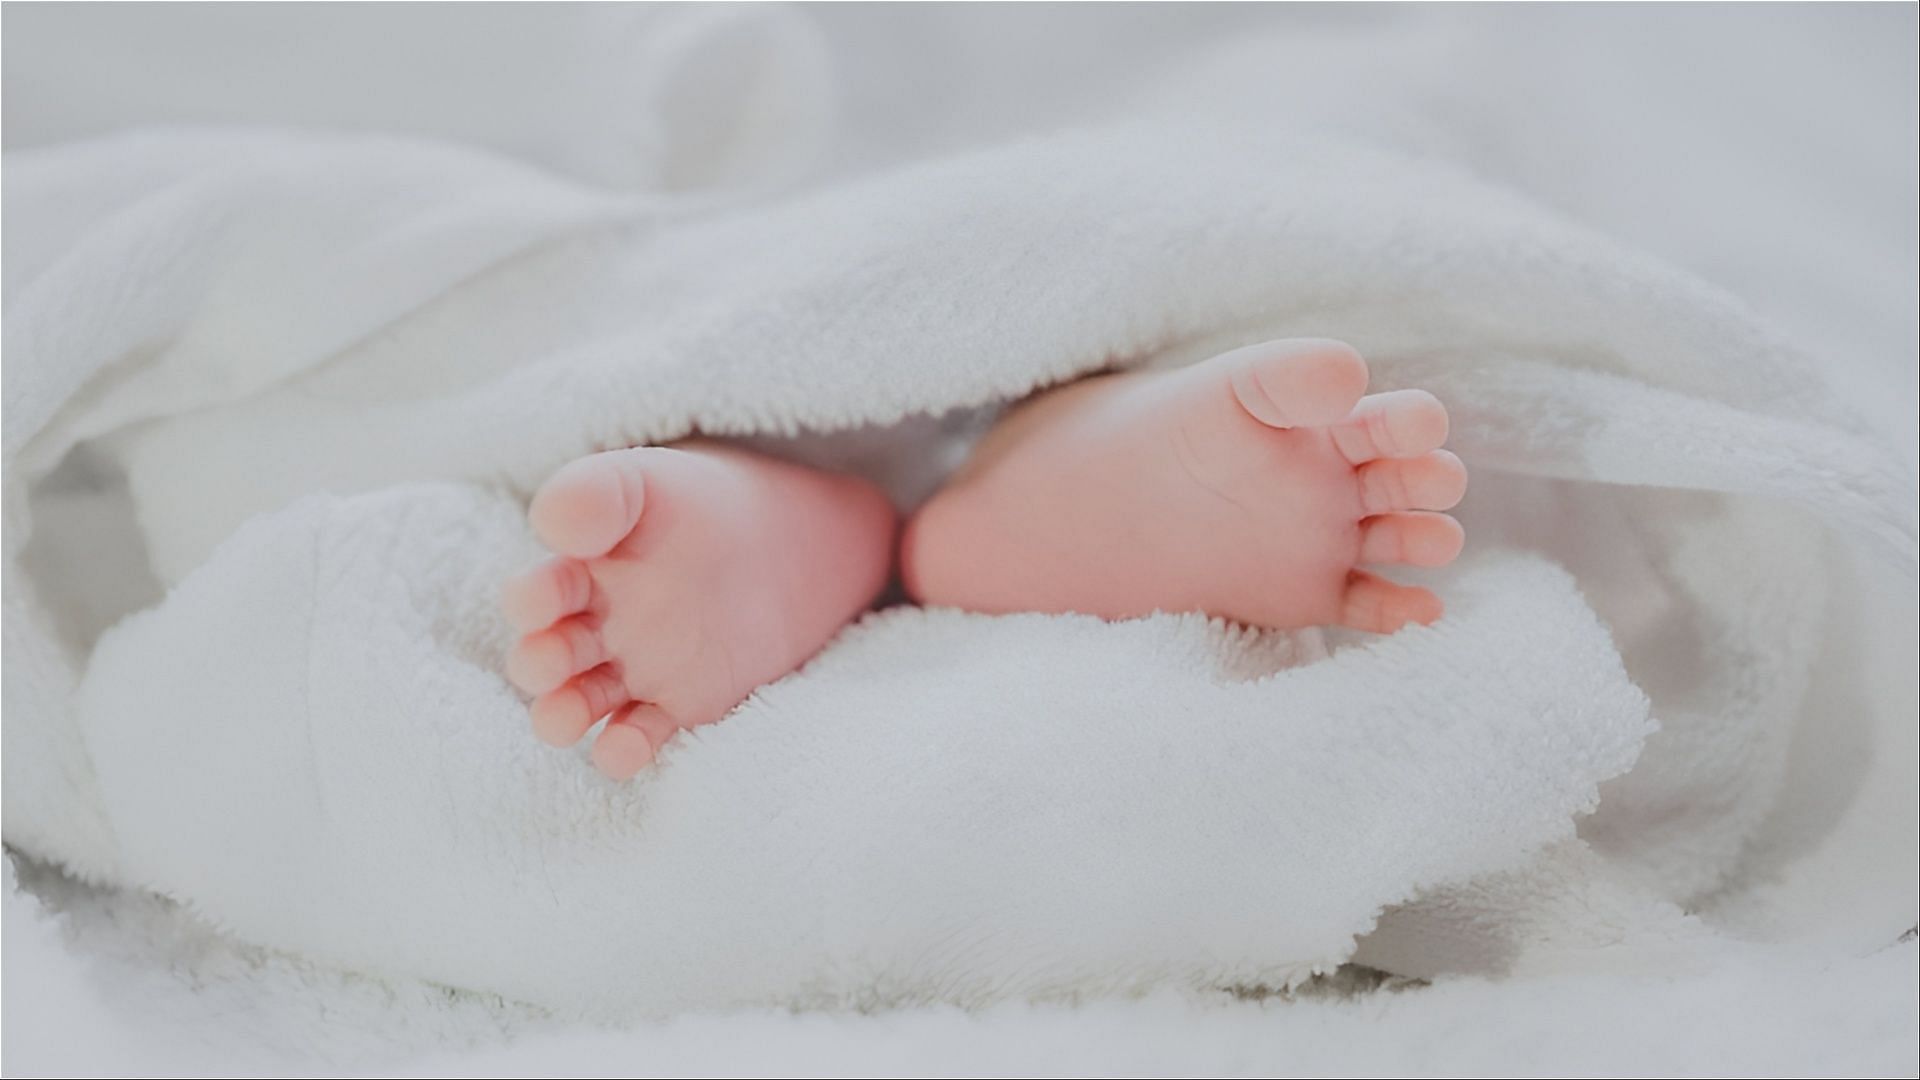 A woman from Missouri reportedly put her baby inside an oven (Representative image via Unsplash)